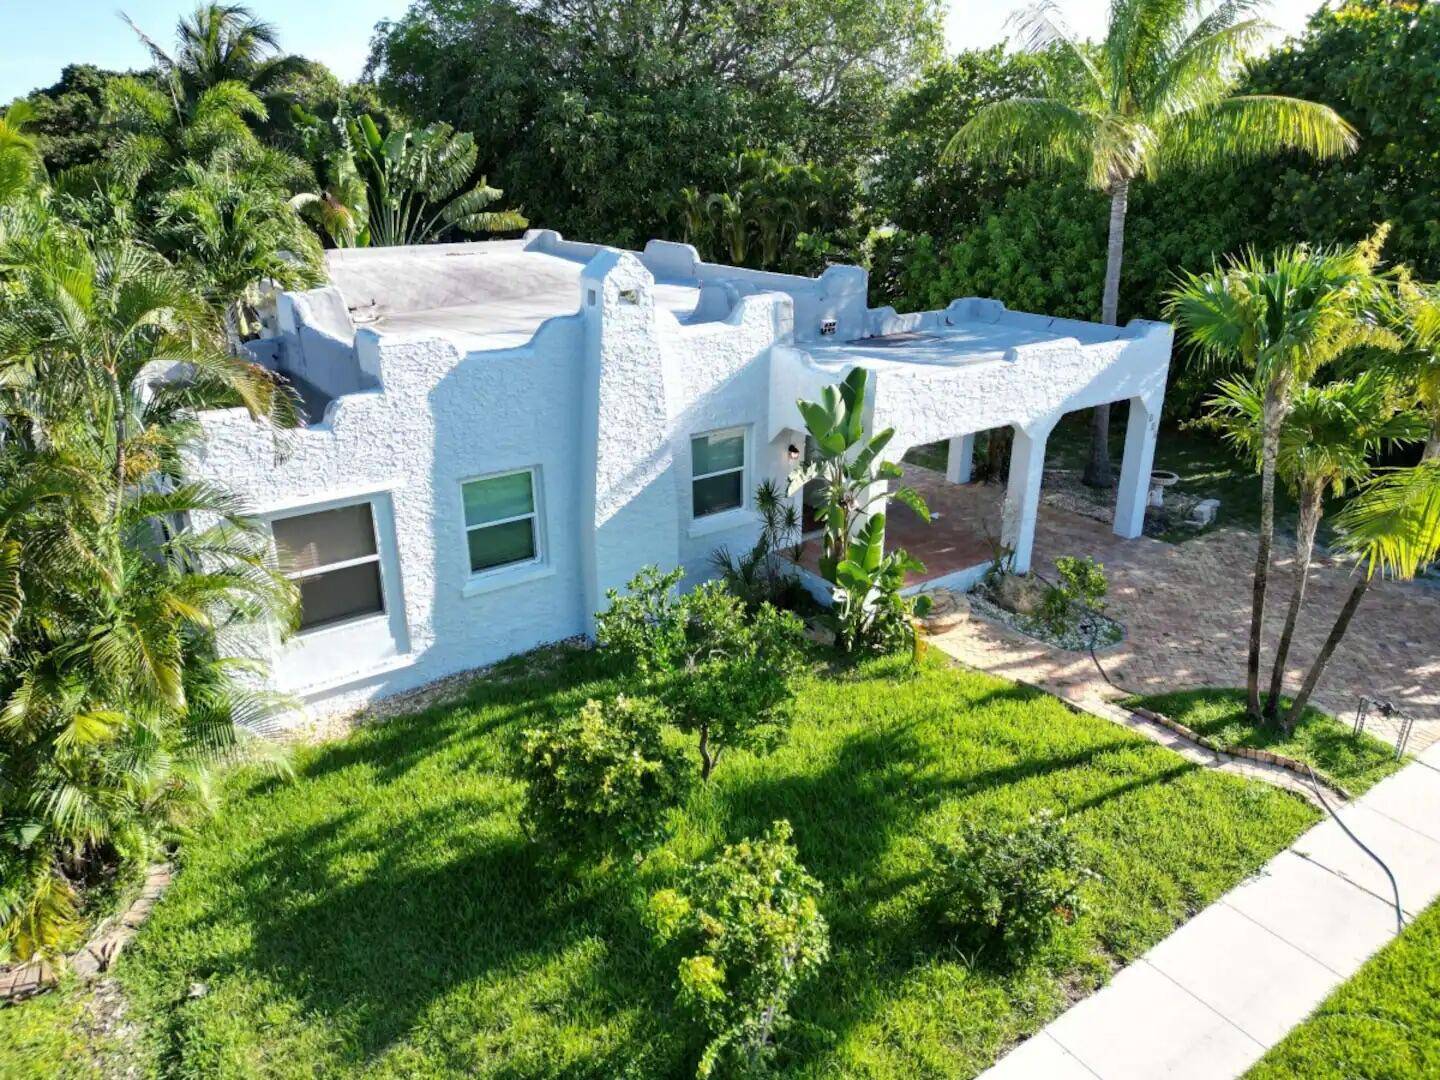 Take advantage of an exceptional opportunity to own a meticulously renovated Spanish Mission style beach home, fully furnished for your immediate enjoyment.